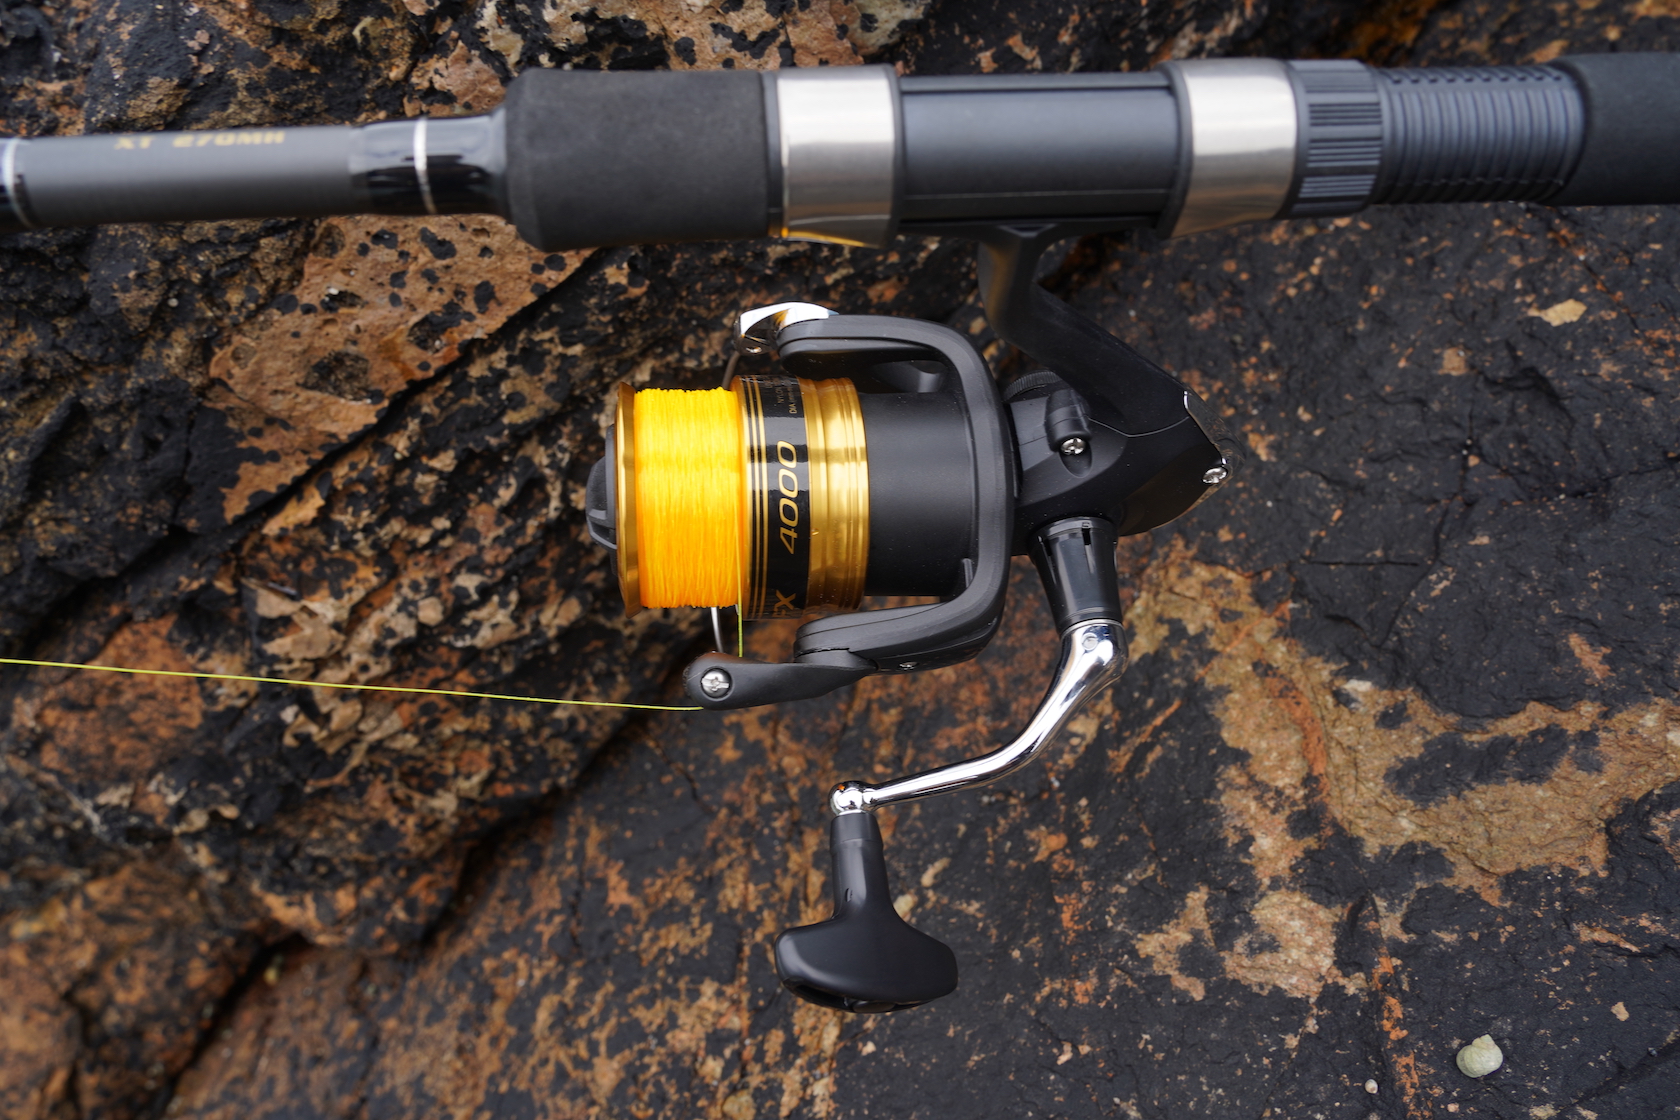 I really want to do more surf based lure fishing, but these lovely smooth Japanese  spinning reels don't like being dunked at all - so I've got a Penn Slammer  III 3500